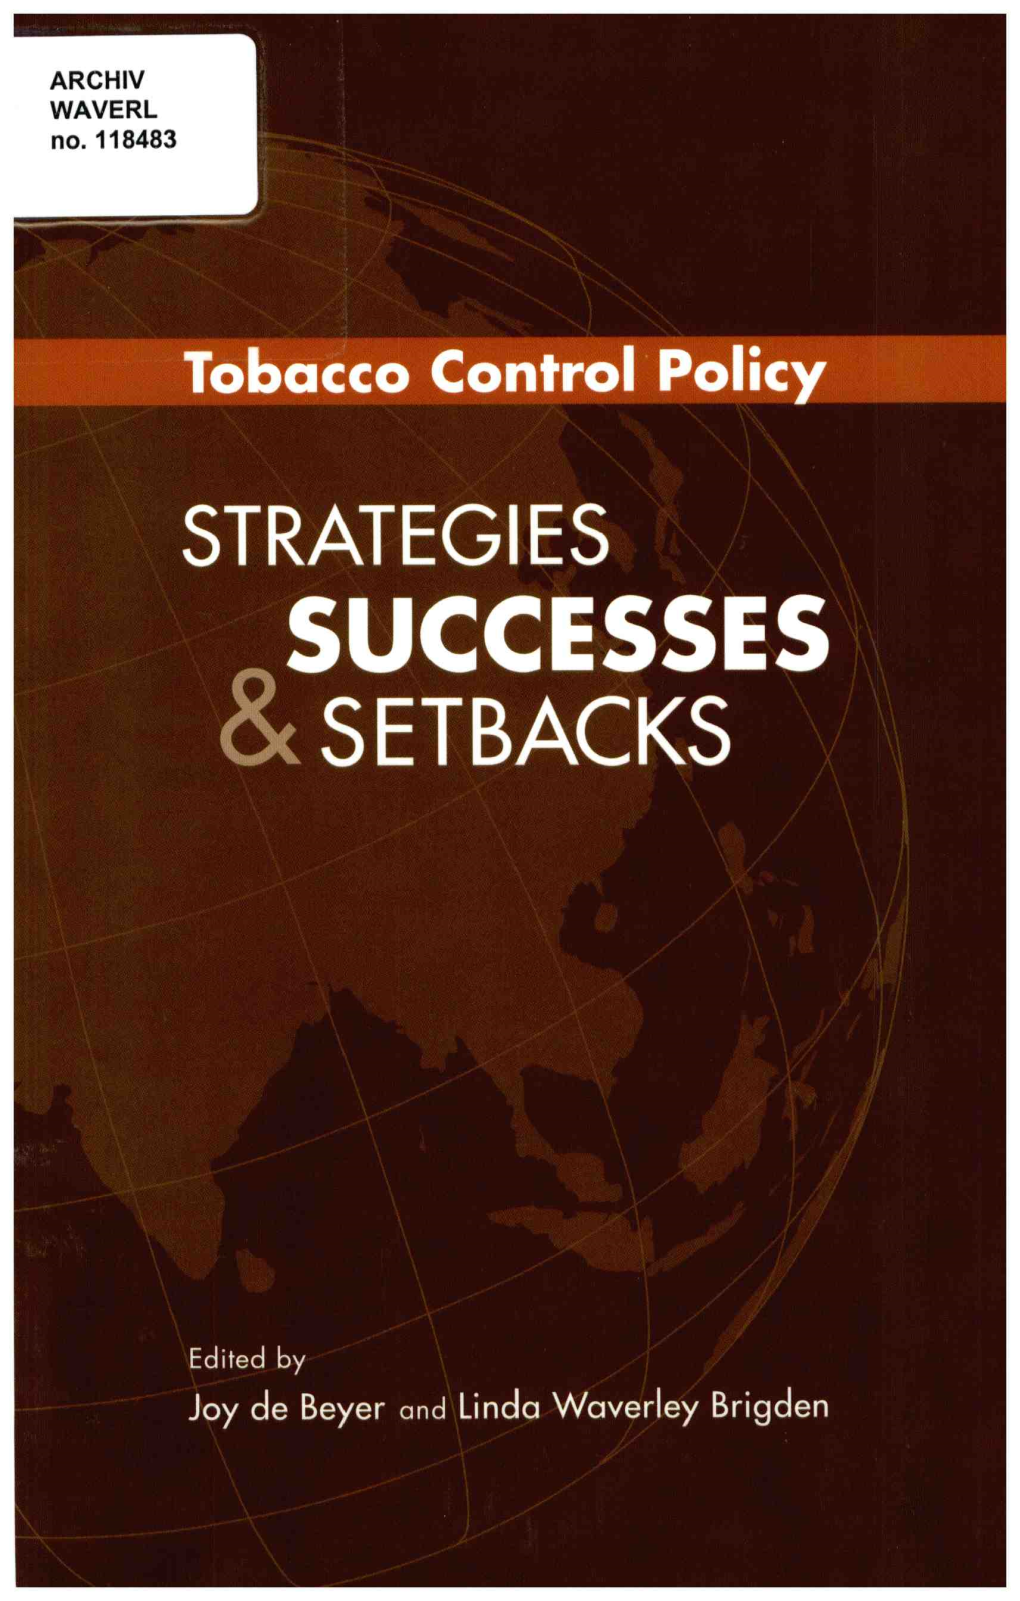 Tobacco Control Policy Strategies, Successes, and Setbacks